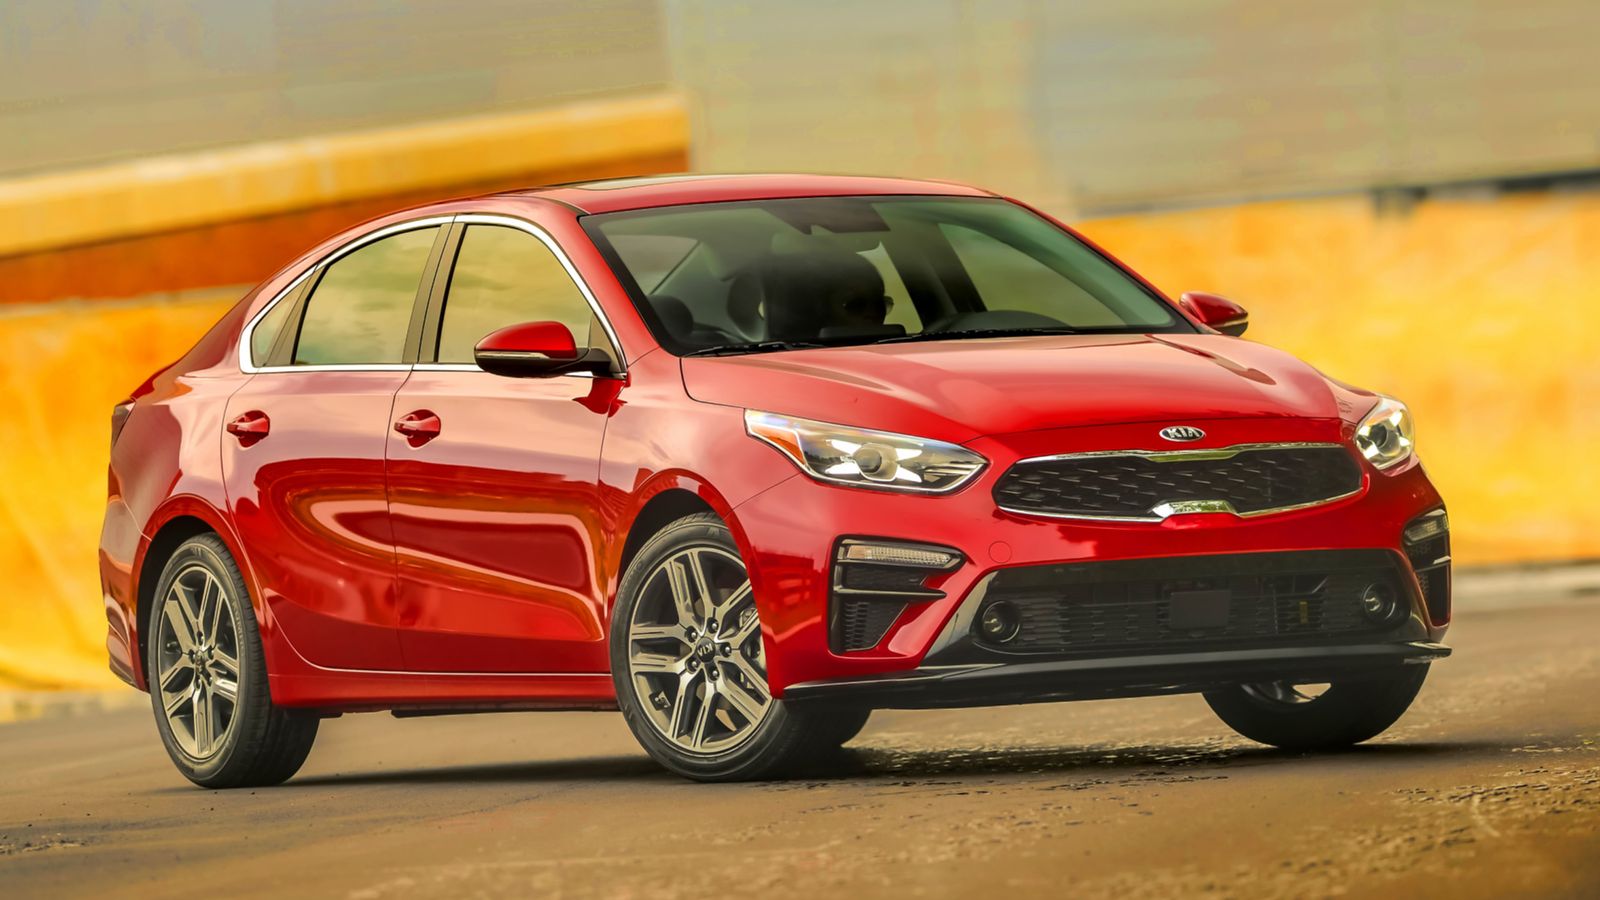 2019 Kia Forte: everything you need to know | DriveMag Cars